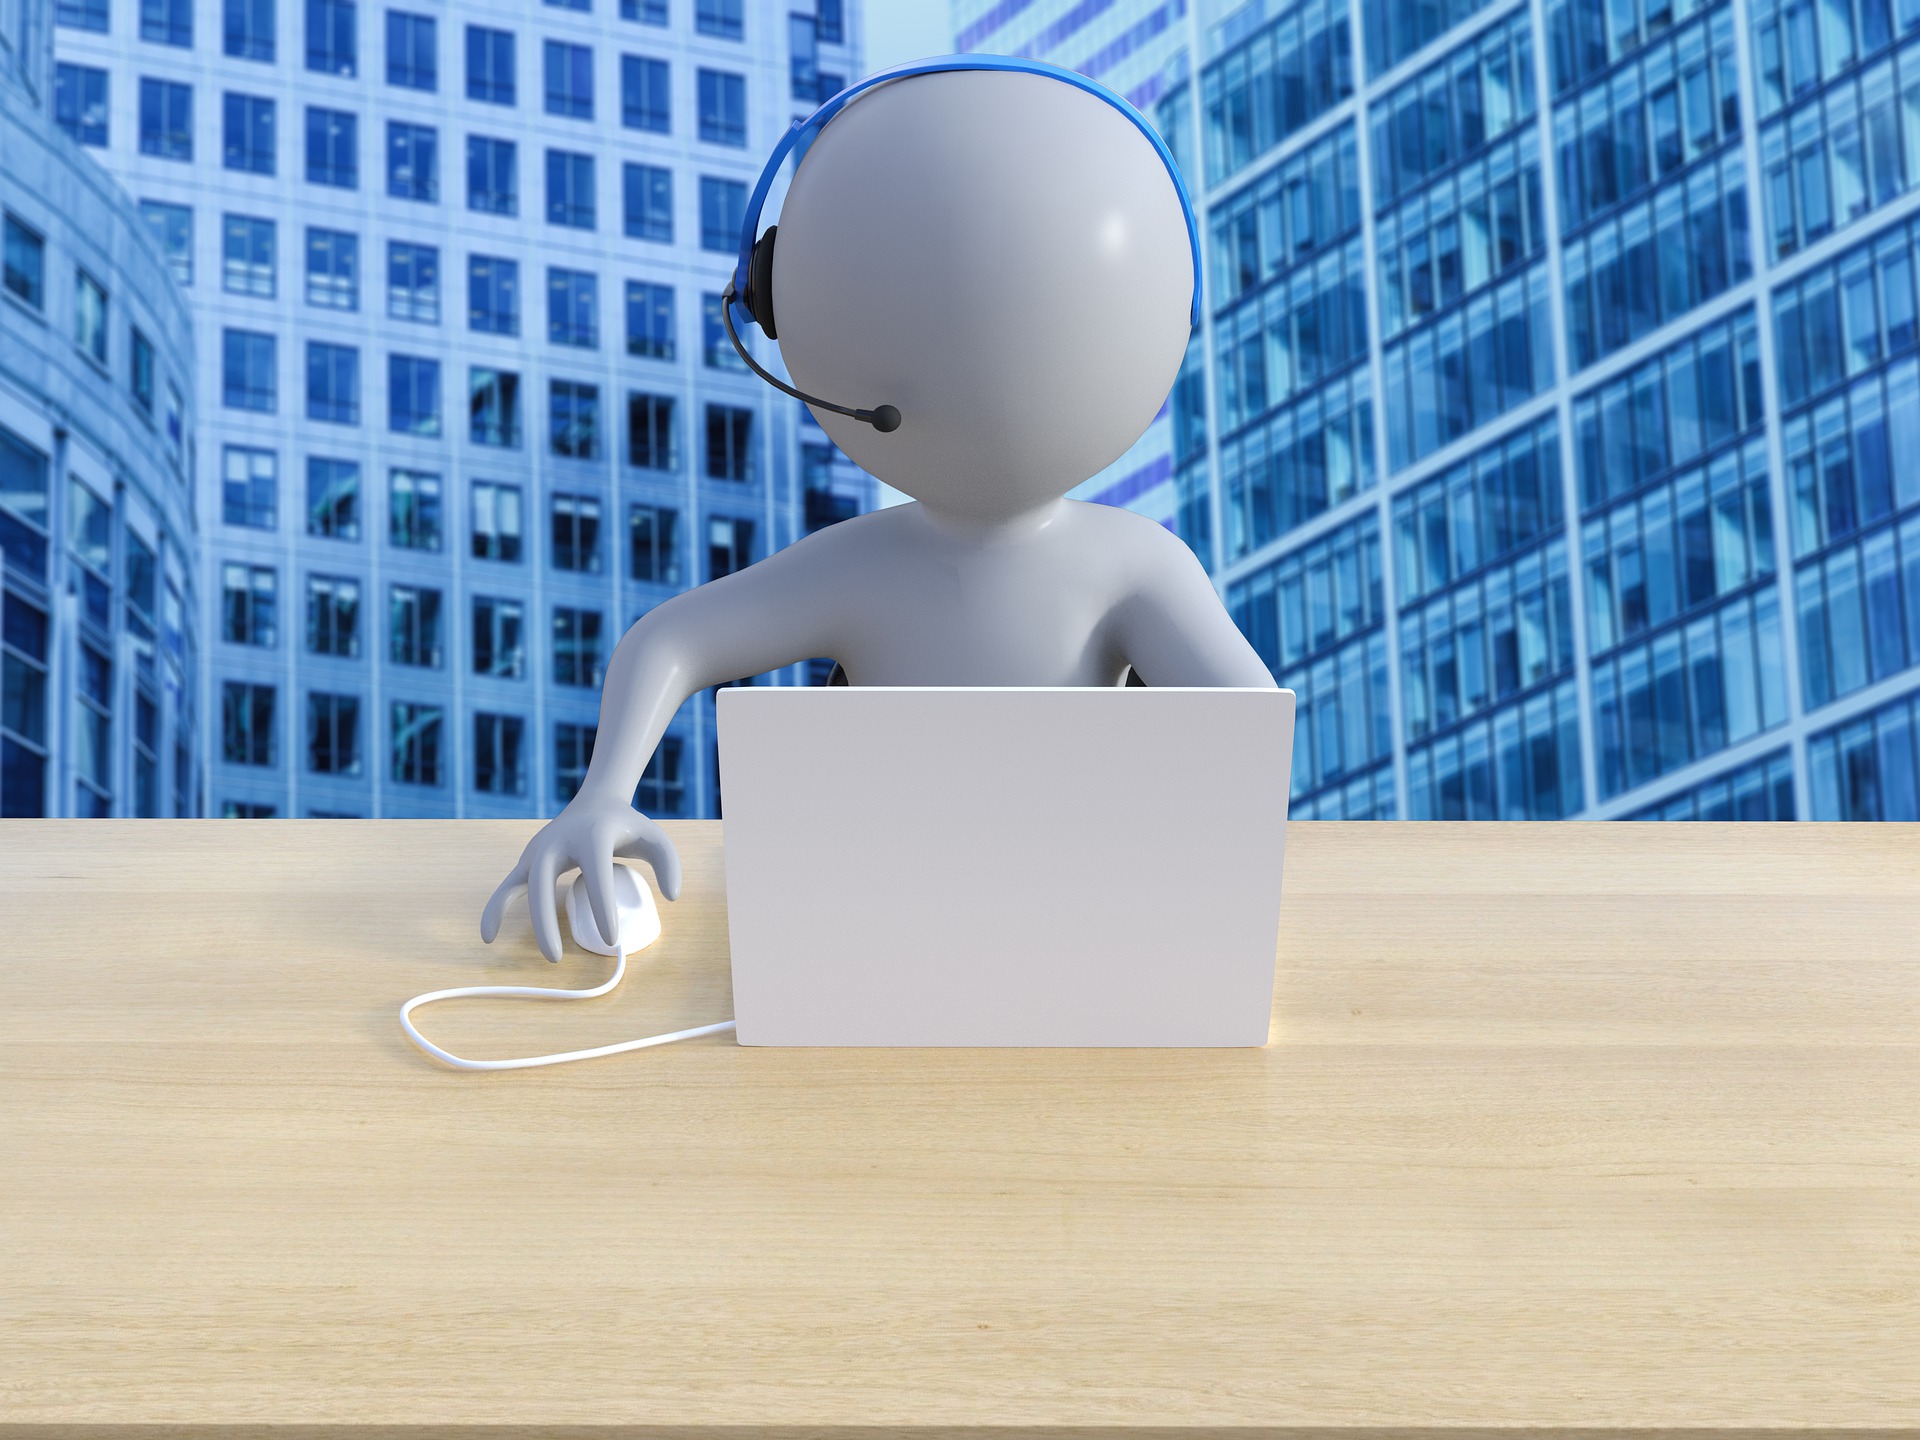 Finding The Right Help Desk Software For Your Small Business